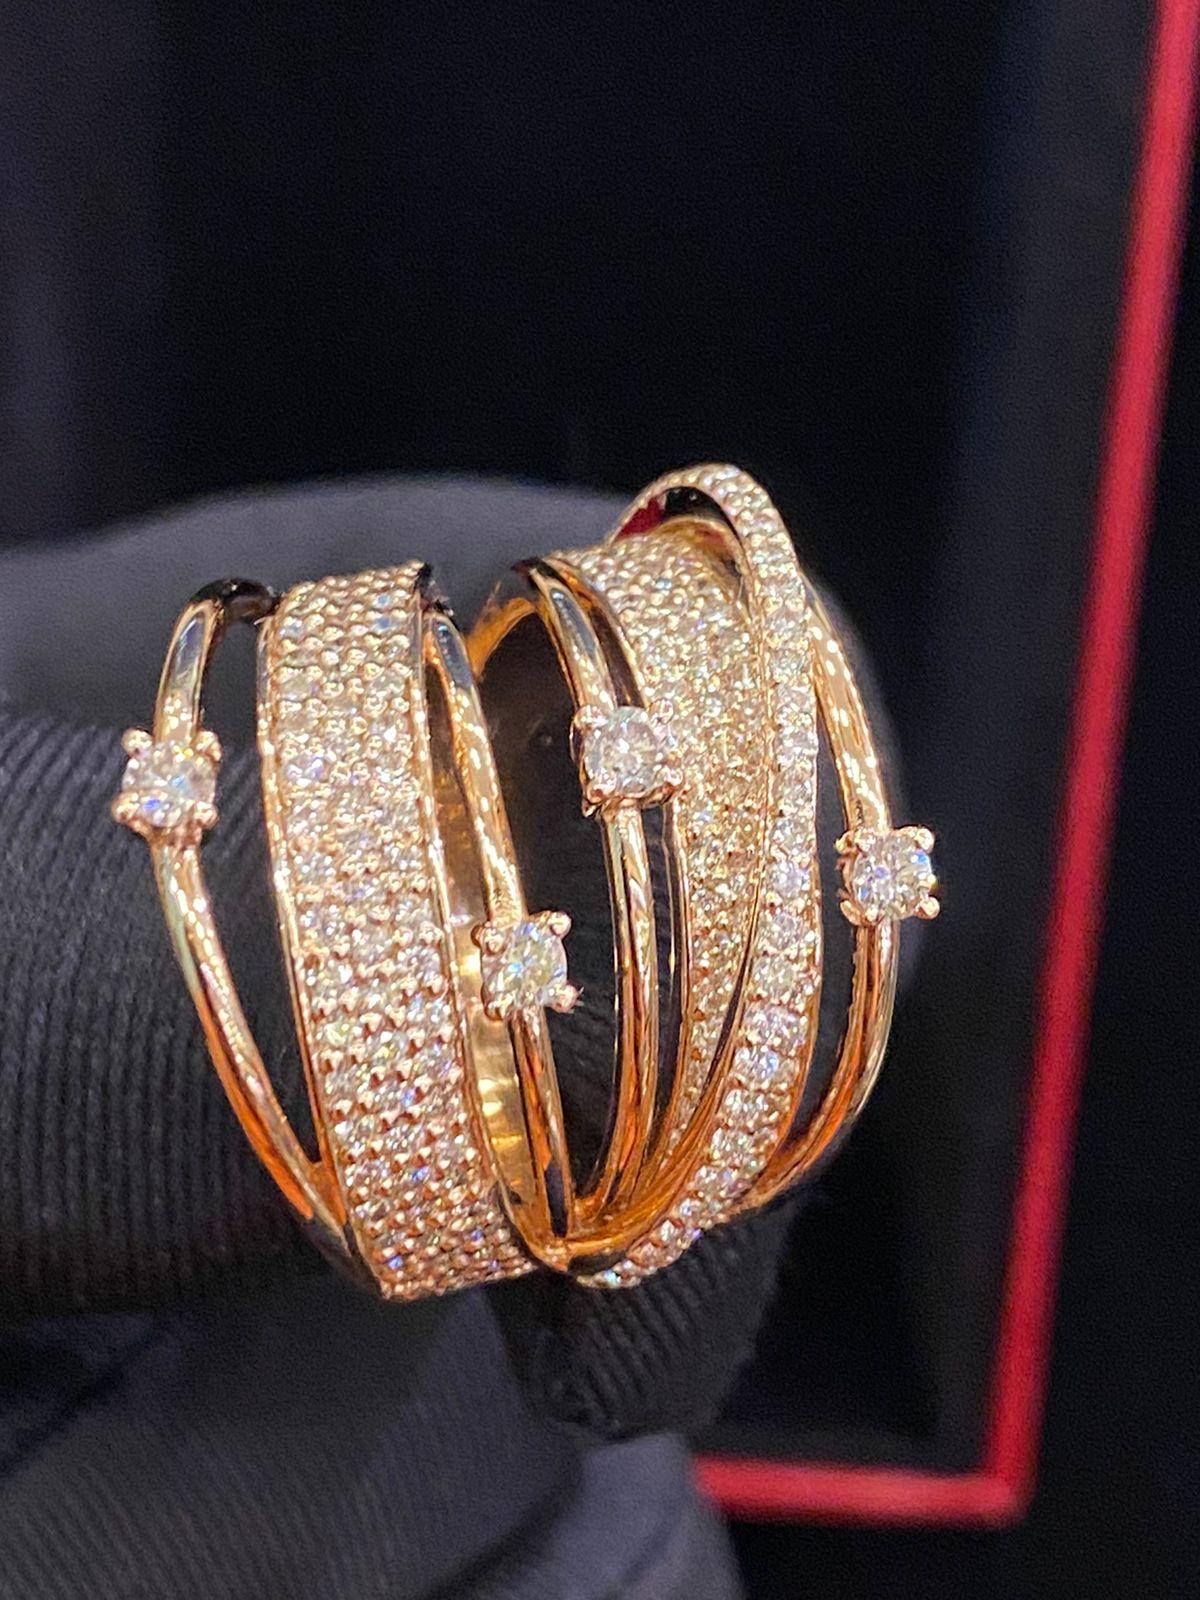 An exquisite design in 14k rosè gold with round brilliant cut diamonds ct 1,92 G/SI.
Handmade jewelry by artisan goldsmith.
Excellent manufacture and quality.

Note:For European customers, I have also option for the shipment from Italy.